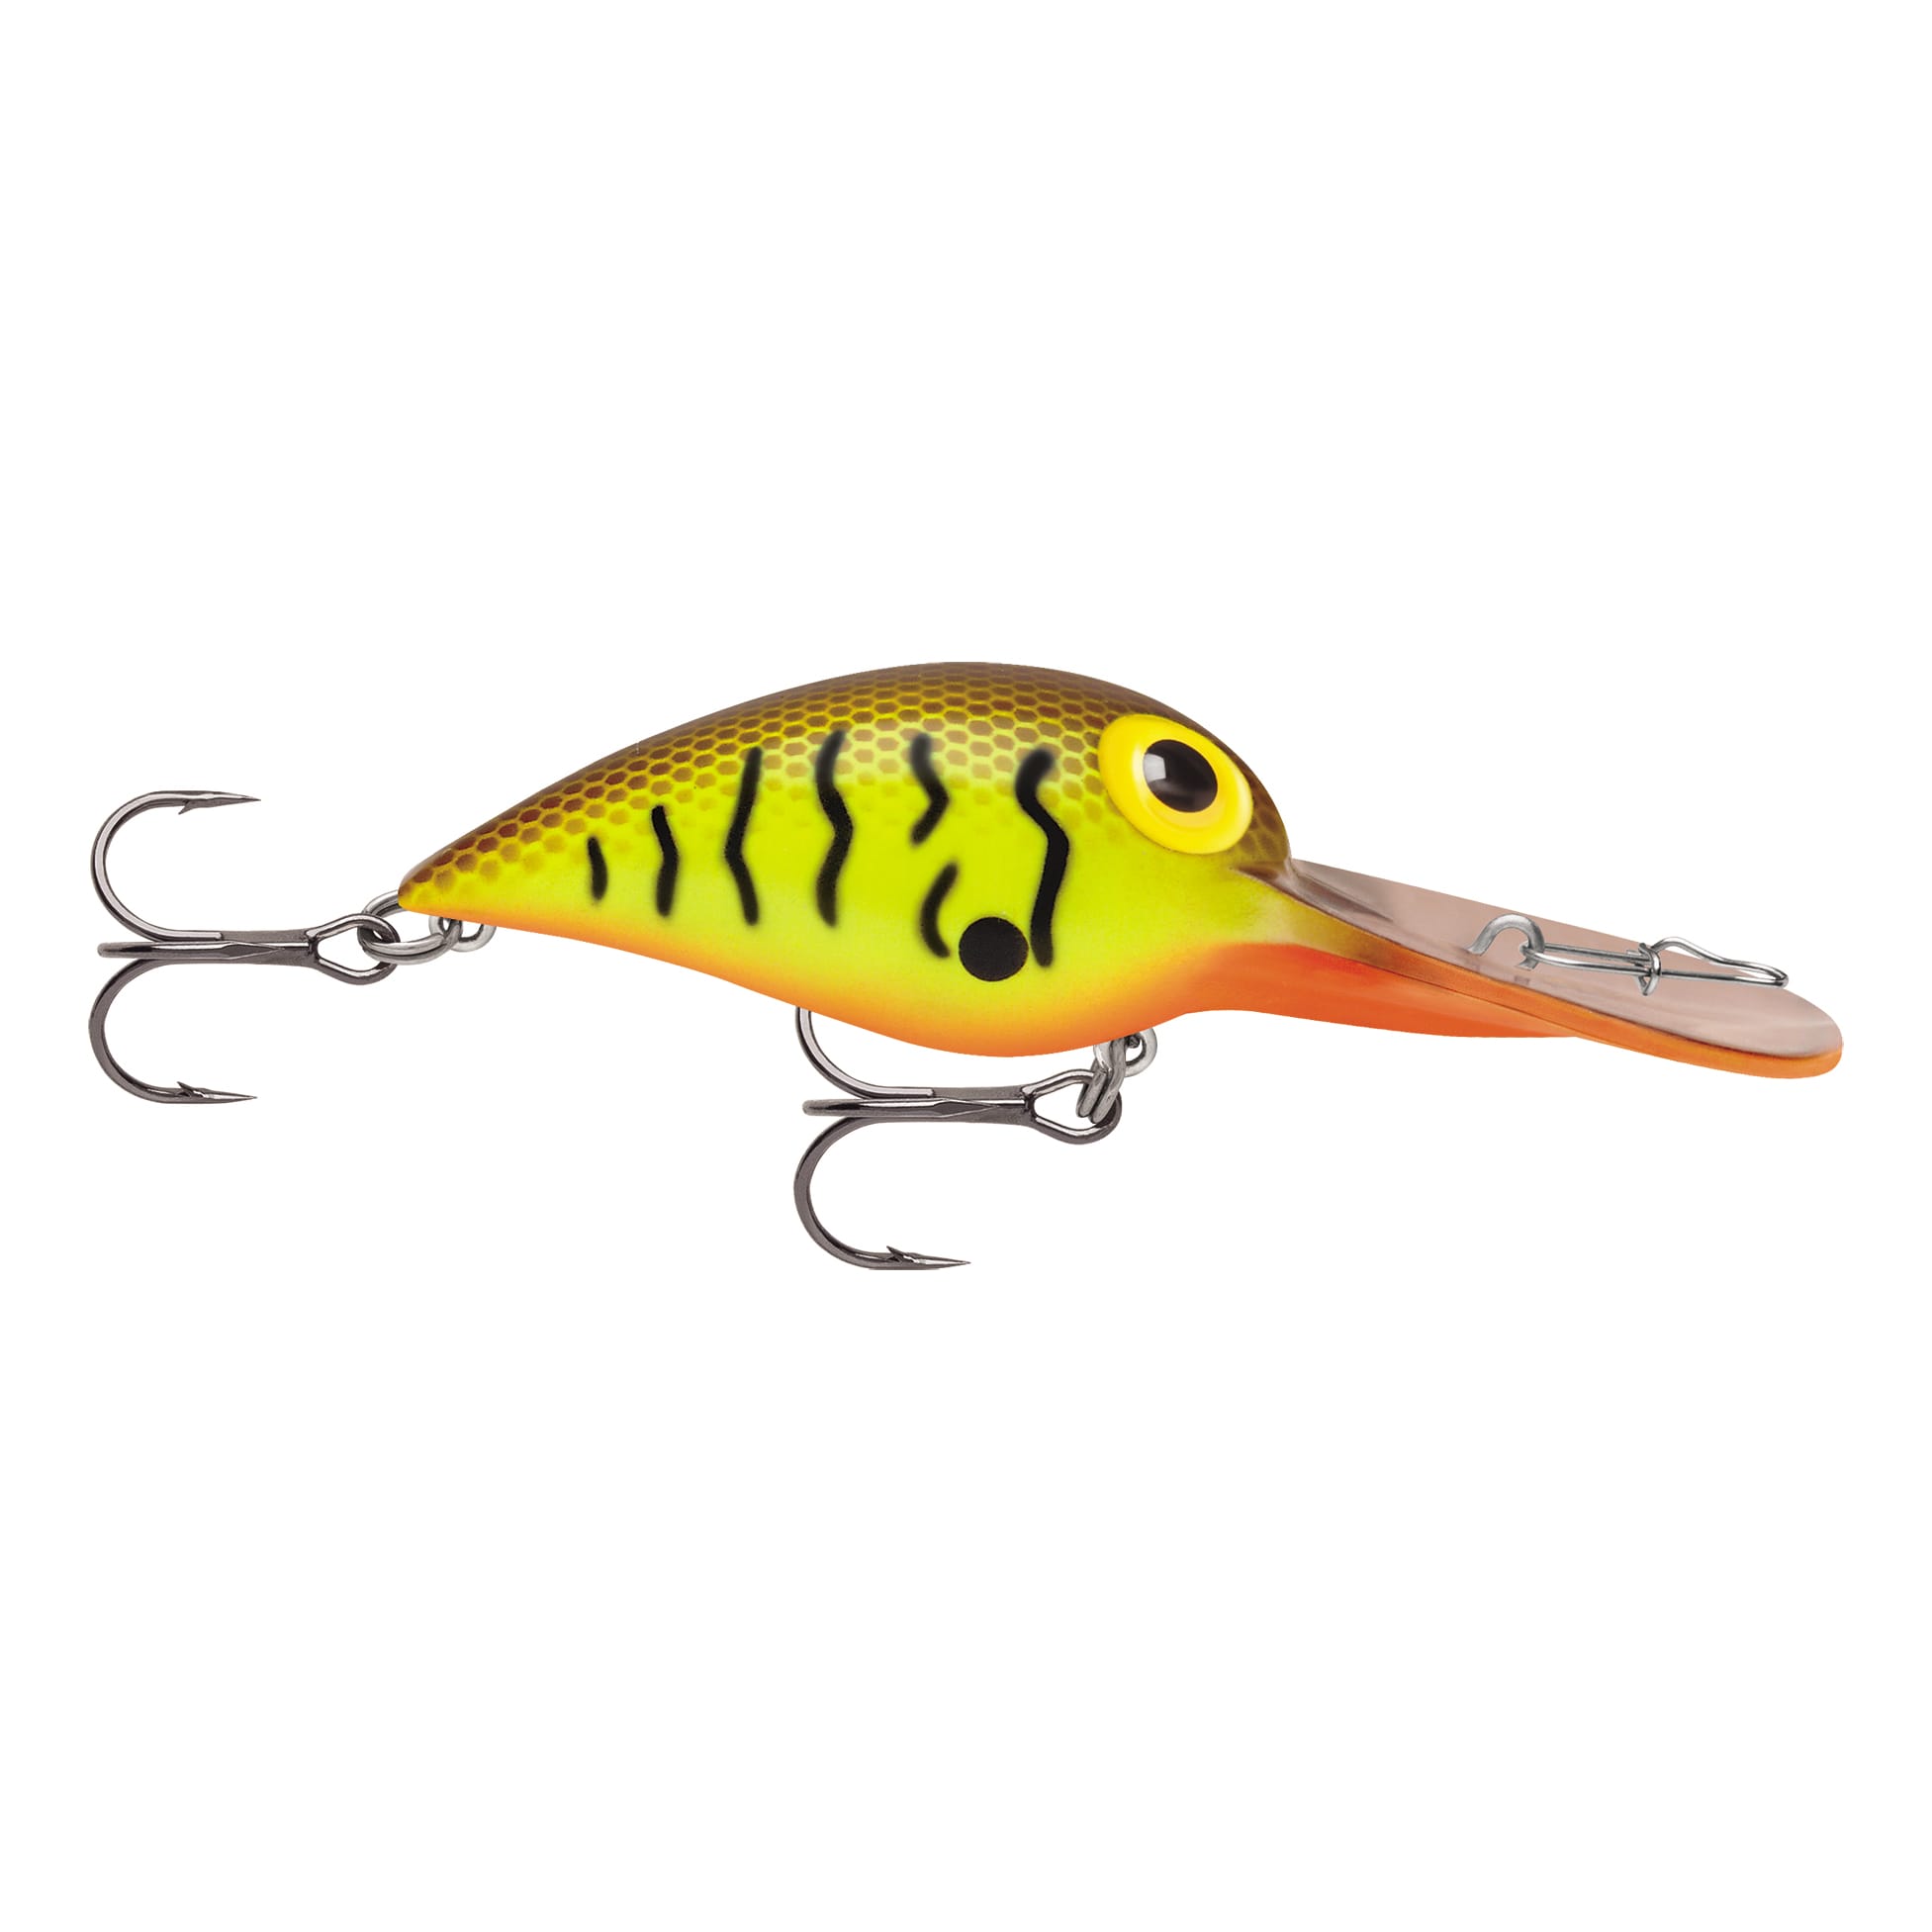 Storm Wiggle Wart , 2/5oz Red fishing lure #7155